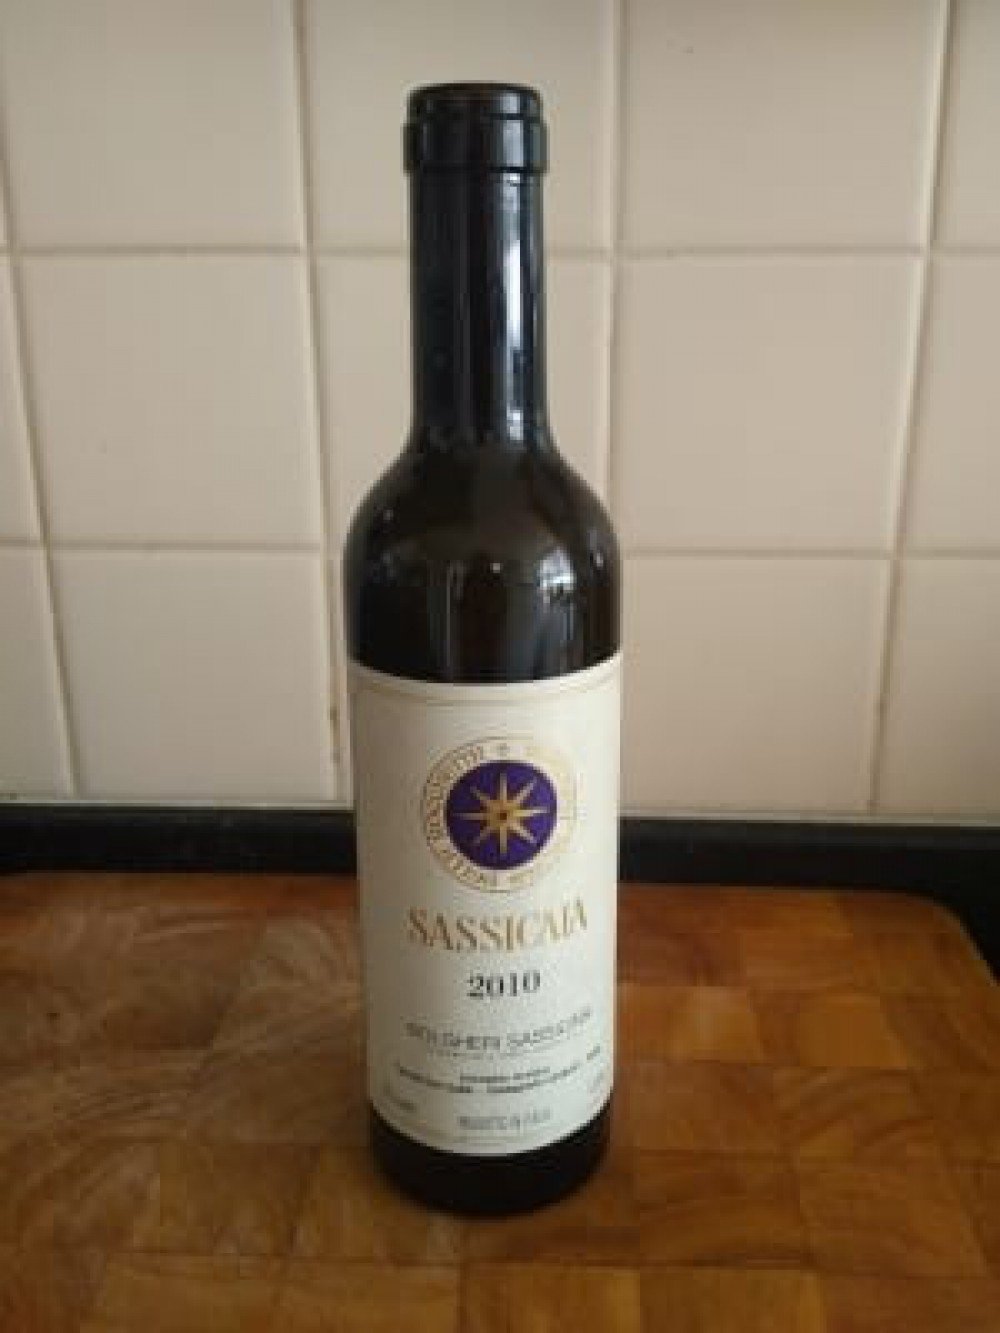 Sassicaia for cooking